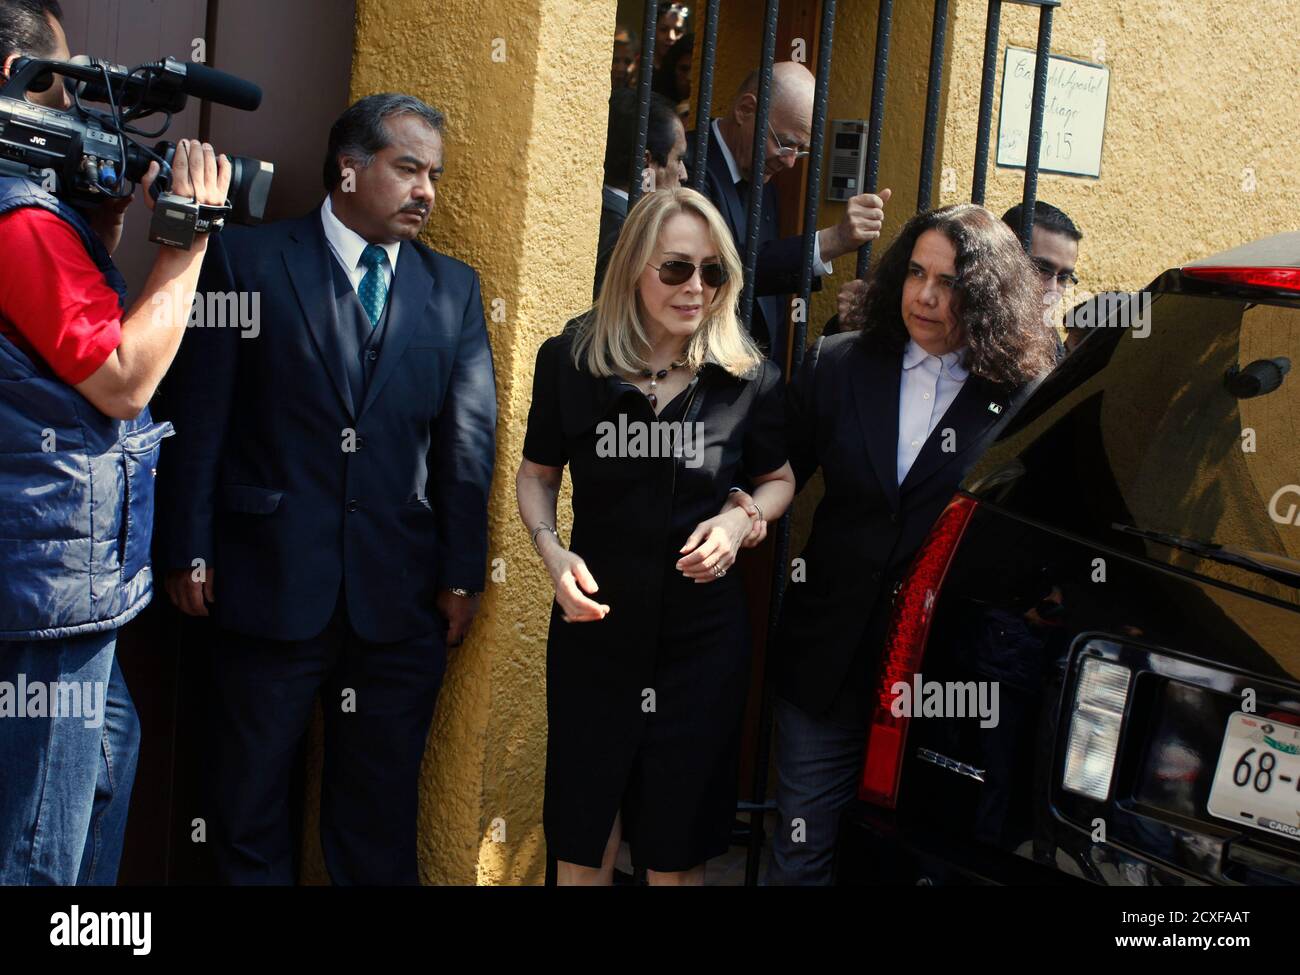 Silvia Lemus, wife of Mexican novelist Carlos Fuentes, is helped by Consuelo Saizar (R), director of the National Council for Culture and Arts as they leave her home towards to a tribute to the deceased writer in Mexico City May 16, 2012. Fuentes, one of Latin America's best-known authors and a sharp critic of governments in Mexico and the United States, died on Tuesday after a literary career spanning more than five decades. He was 83. REUTERS/Tomas Bravo (MEXICO - Tags: SOCIETY OBITUARY POLITICS ENTERTAINMENT) Stock Photo